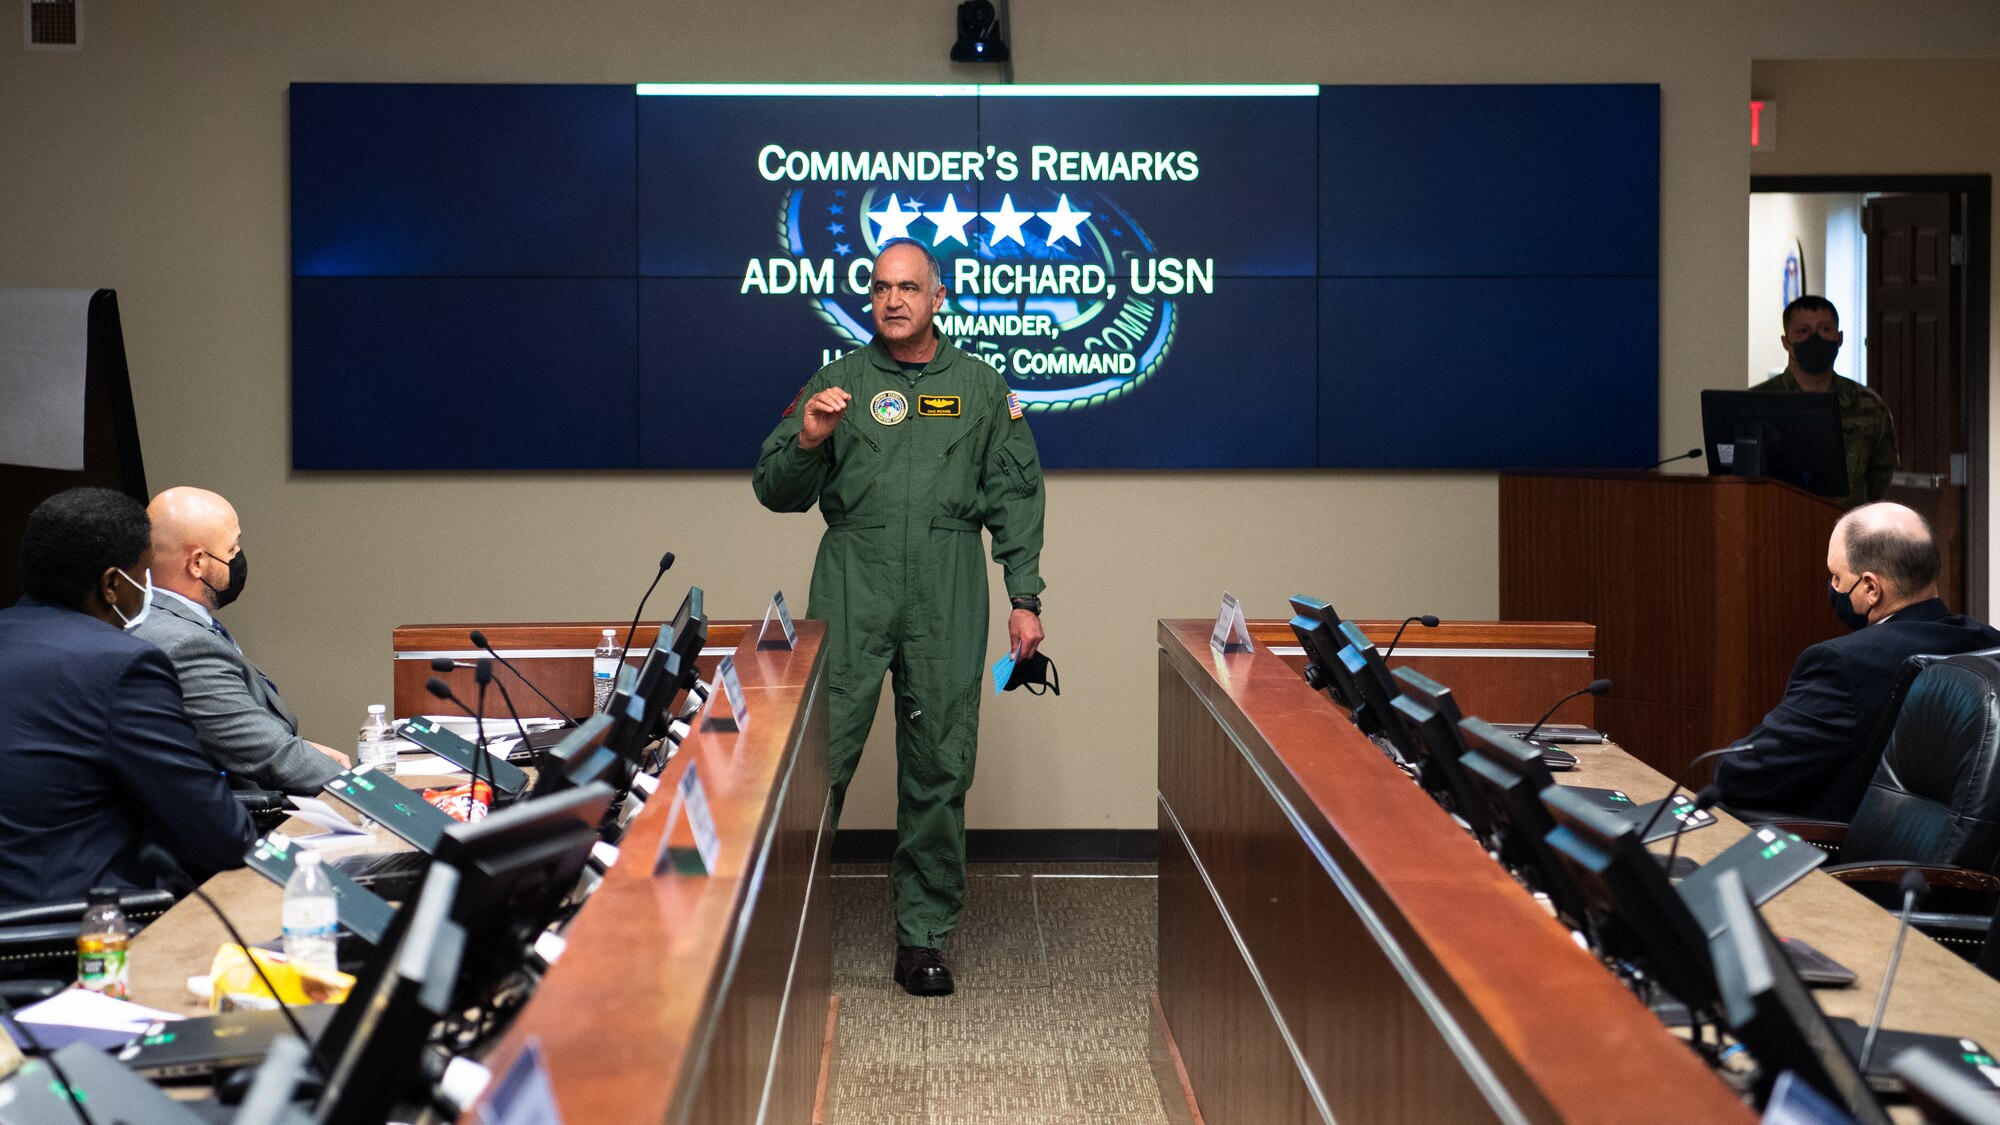 Adm. Charles Richard, U.S. Strategic Command commander, addresses the crowd at a table top exercise at Barksdale Air Force Base, Louisiana, March 30, 2021. As a global warfighting combatant command, USSTRATCOM delivers a dominant strategic force and innovative team to maintain our Nation’s enduring strength, prevent and prevail in great power conflict, and grow the intellectual capital to forge 21st century strategic deterrence. (U.S. Air Force photo by Airman 1st Class Jacob B. Wrightsman)